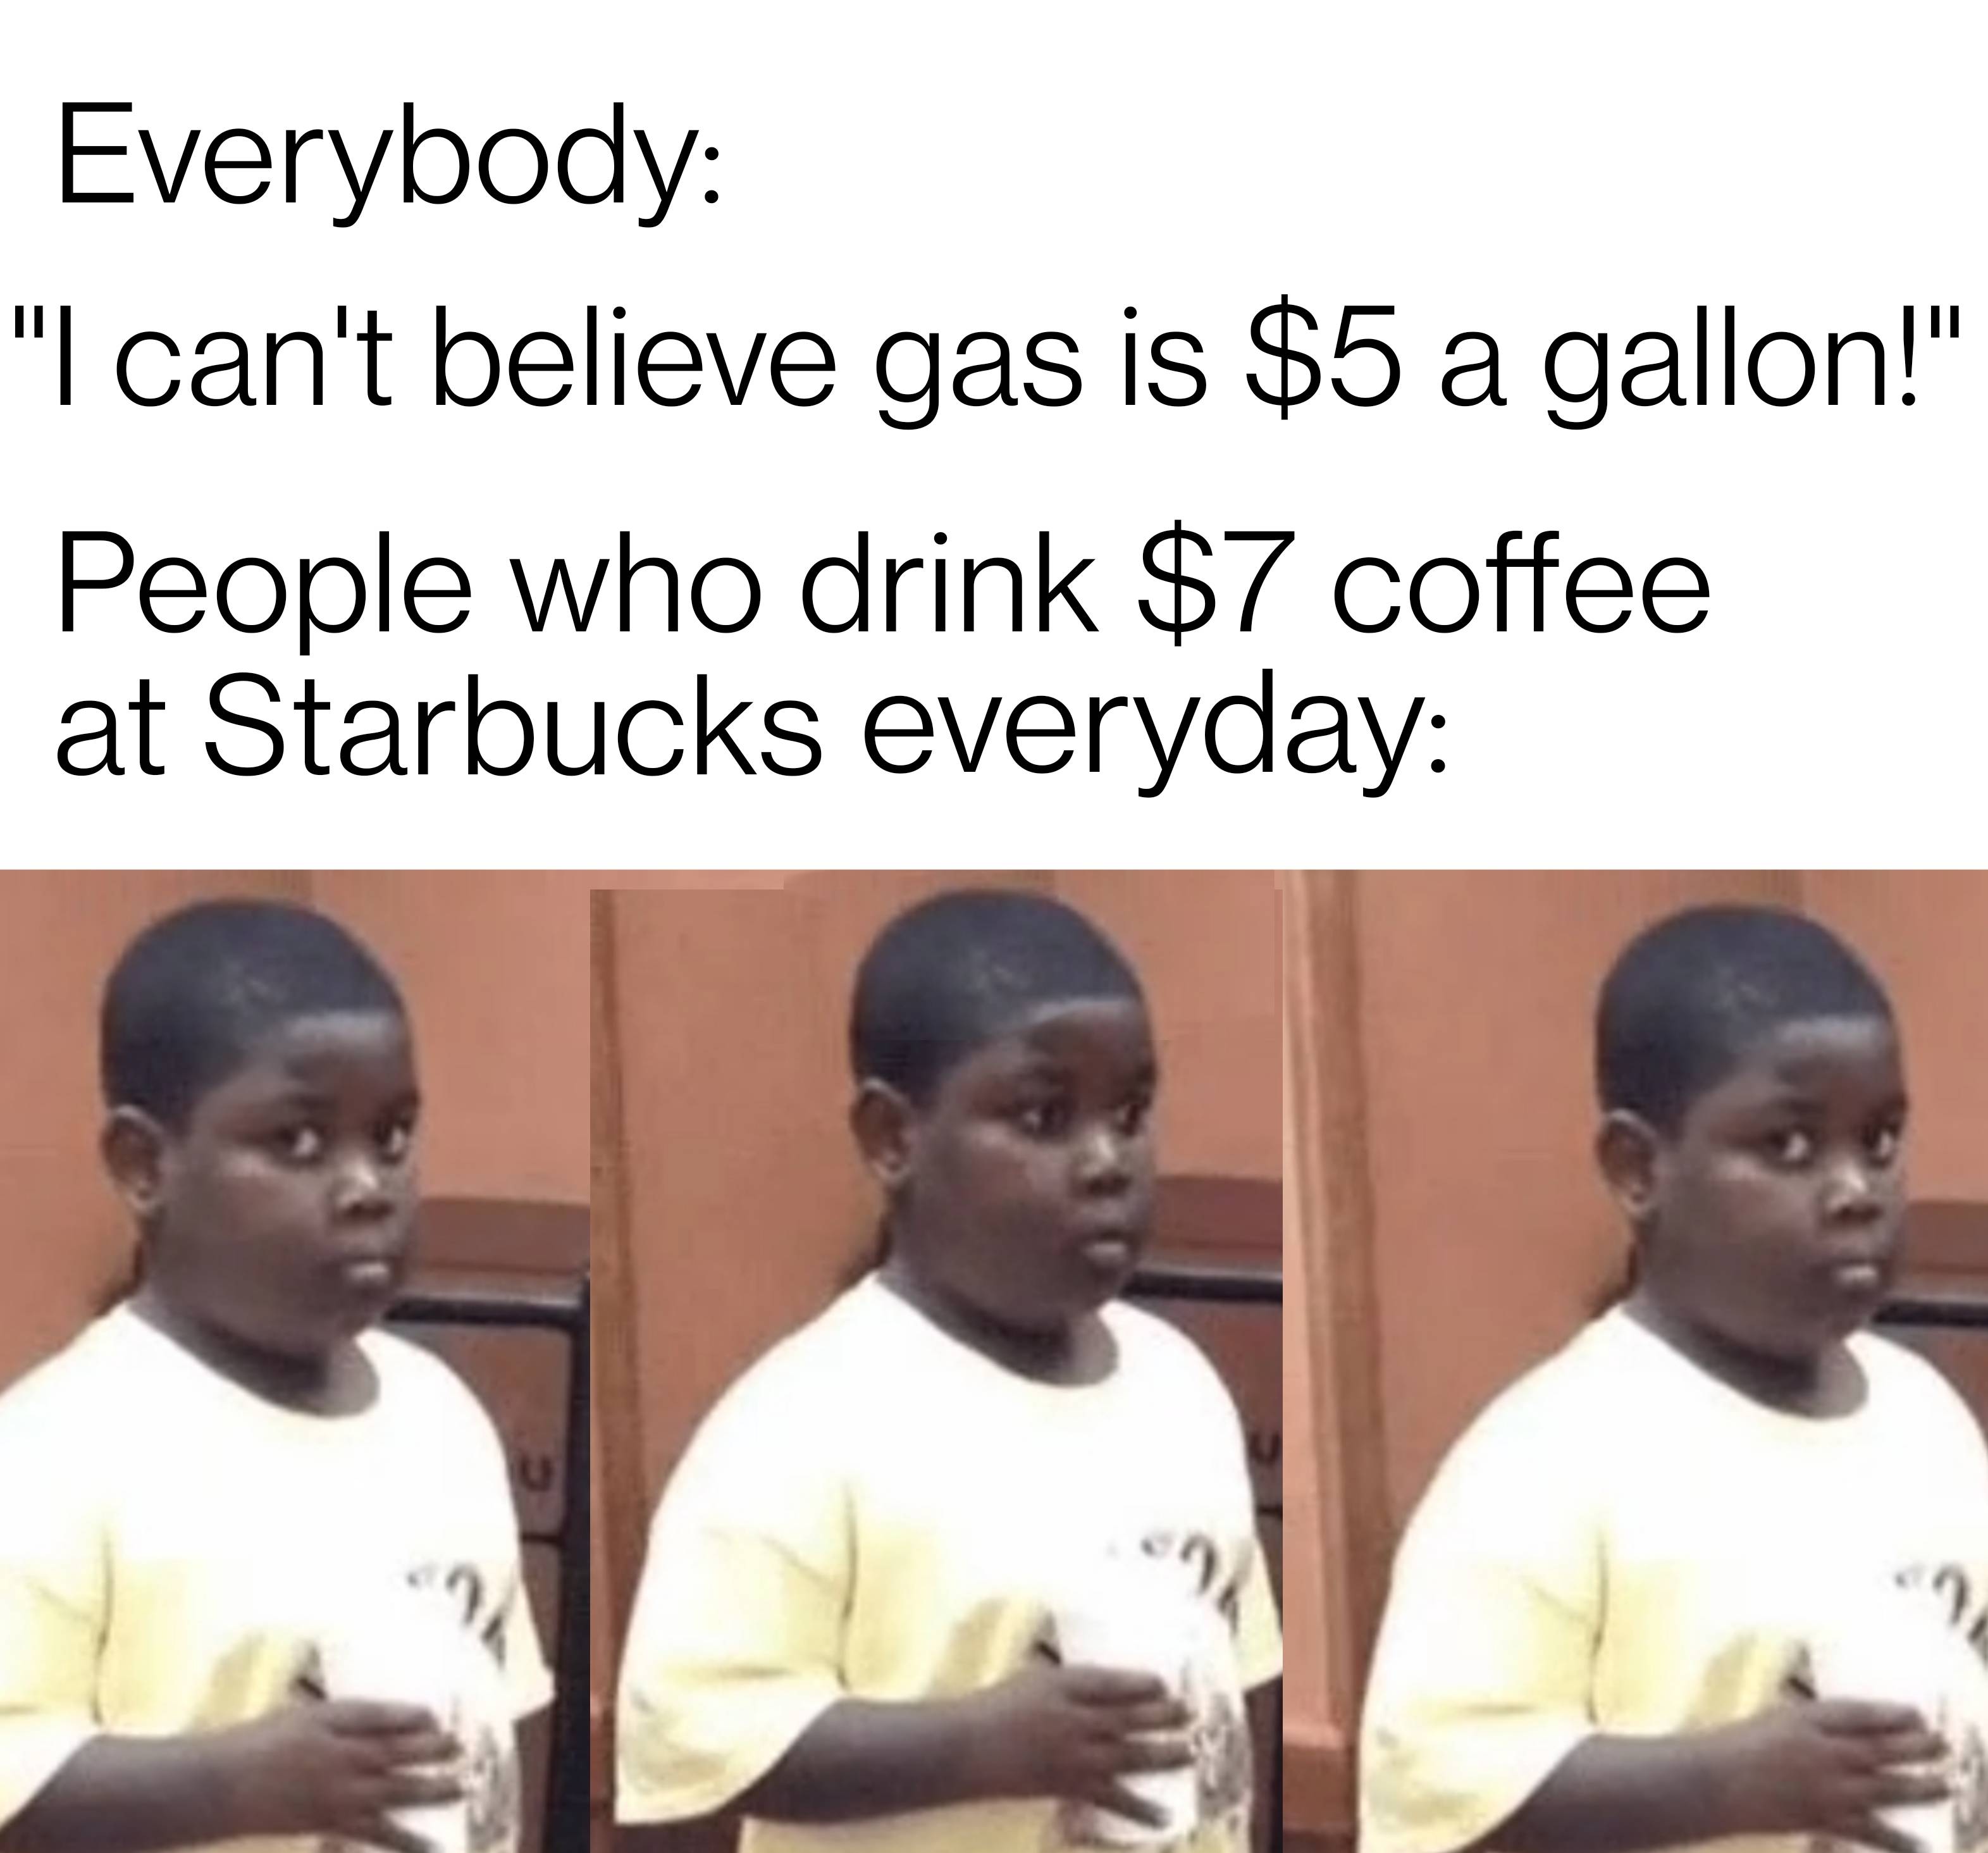 funny memes - dank memes - photo caption - ag Everybody "I can't believe gas is $5 a gallon!" People who drink $7 coffee at Starbucks everyday 7